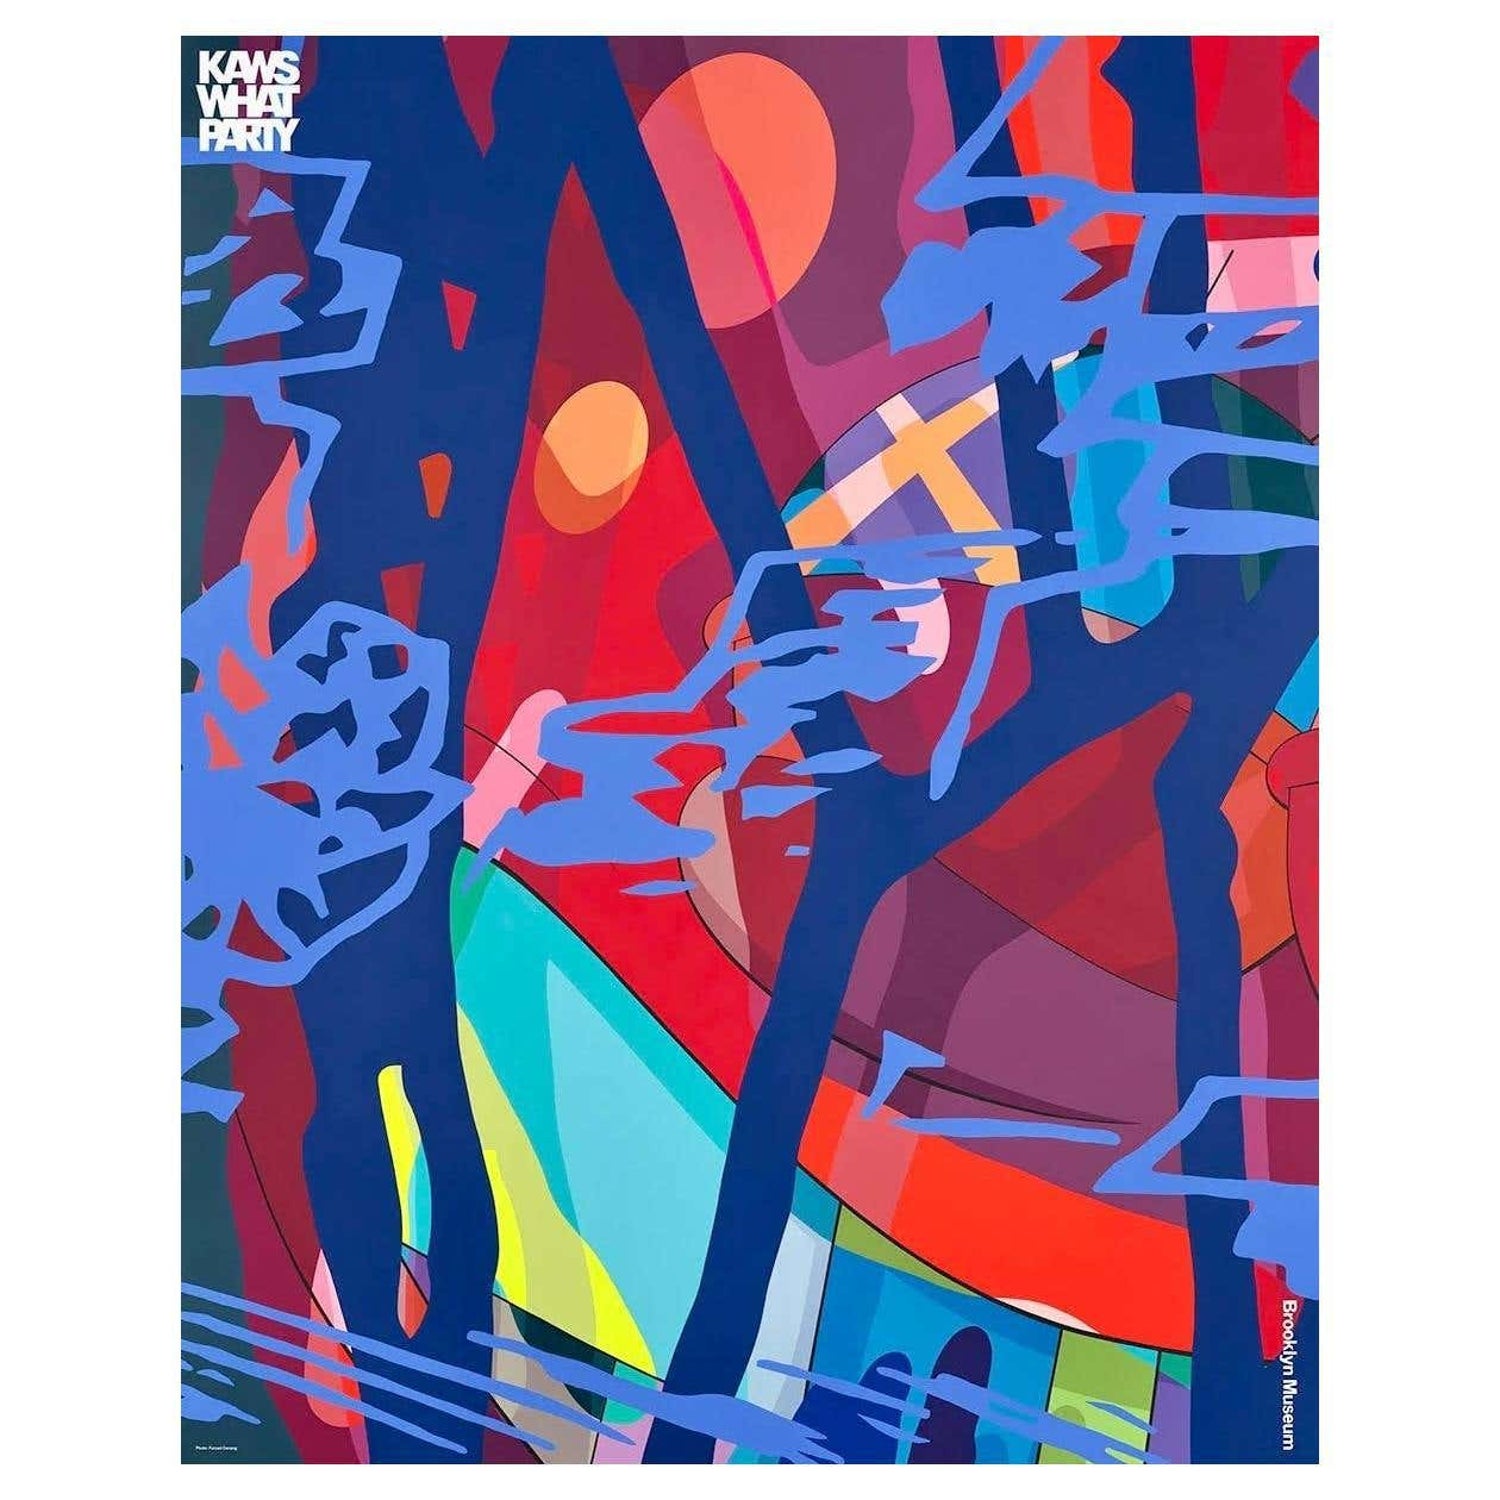 KAWS 'Score Years' Poster (KAWS Brooklyn Museum 2021) For Sale at 1stDibs